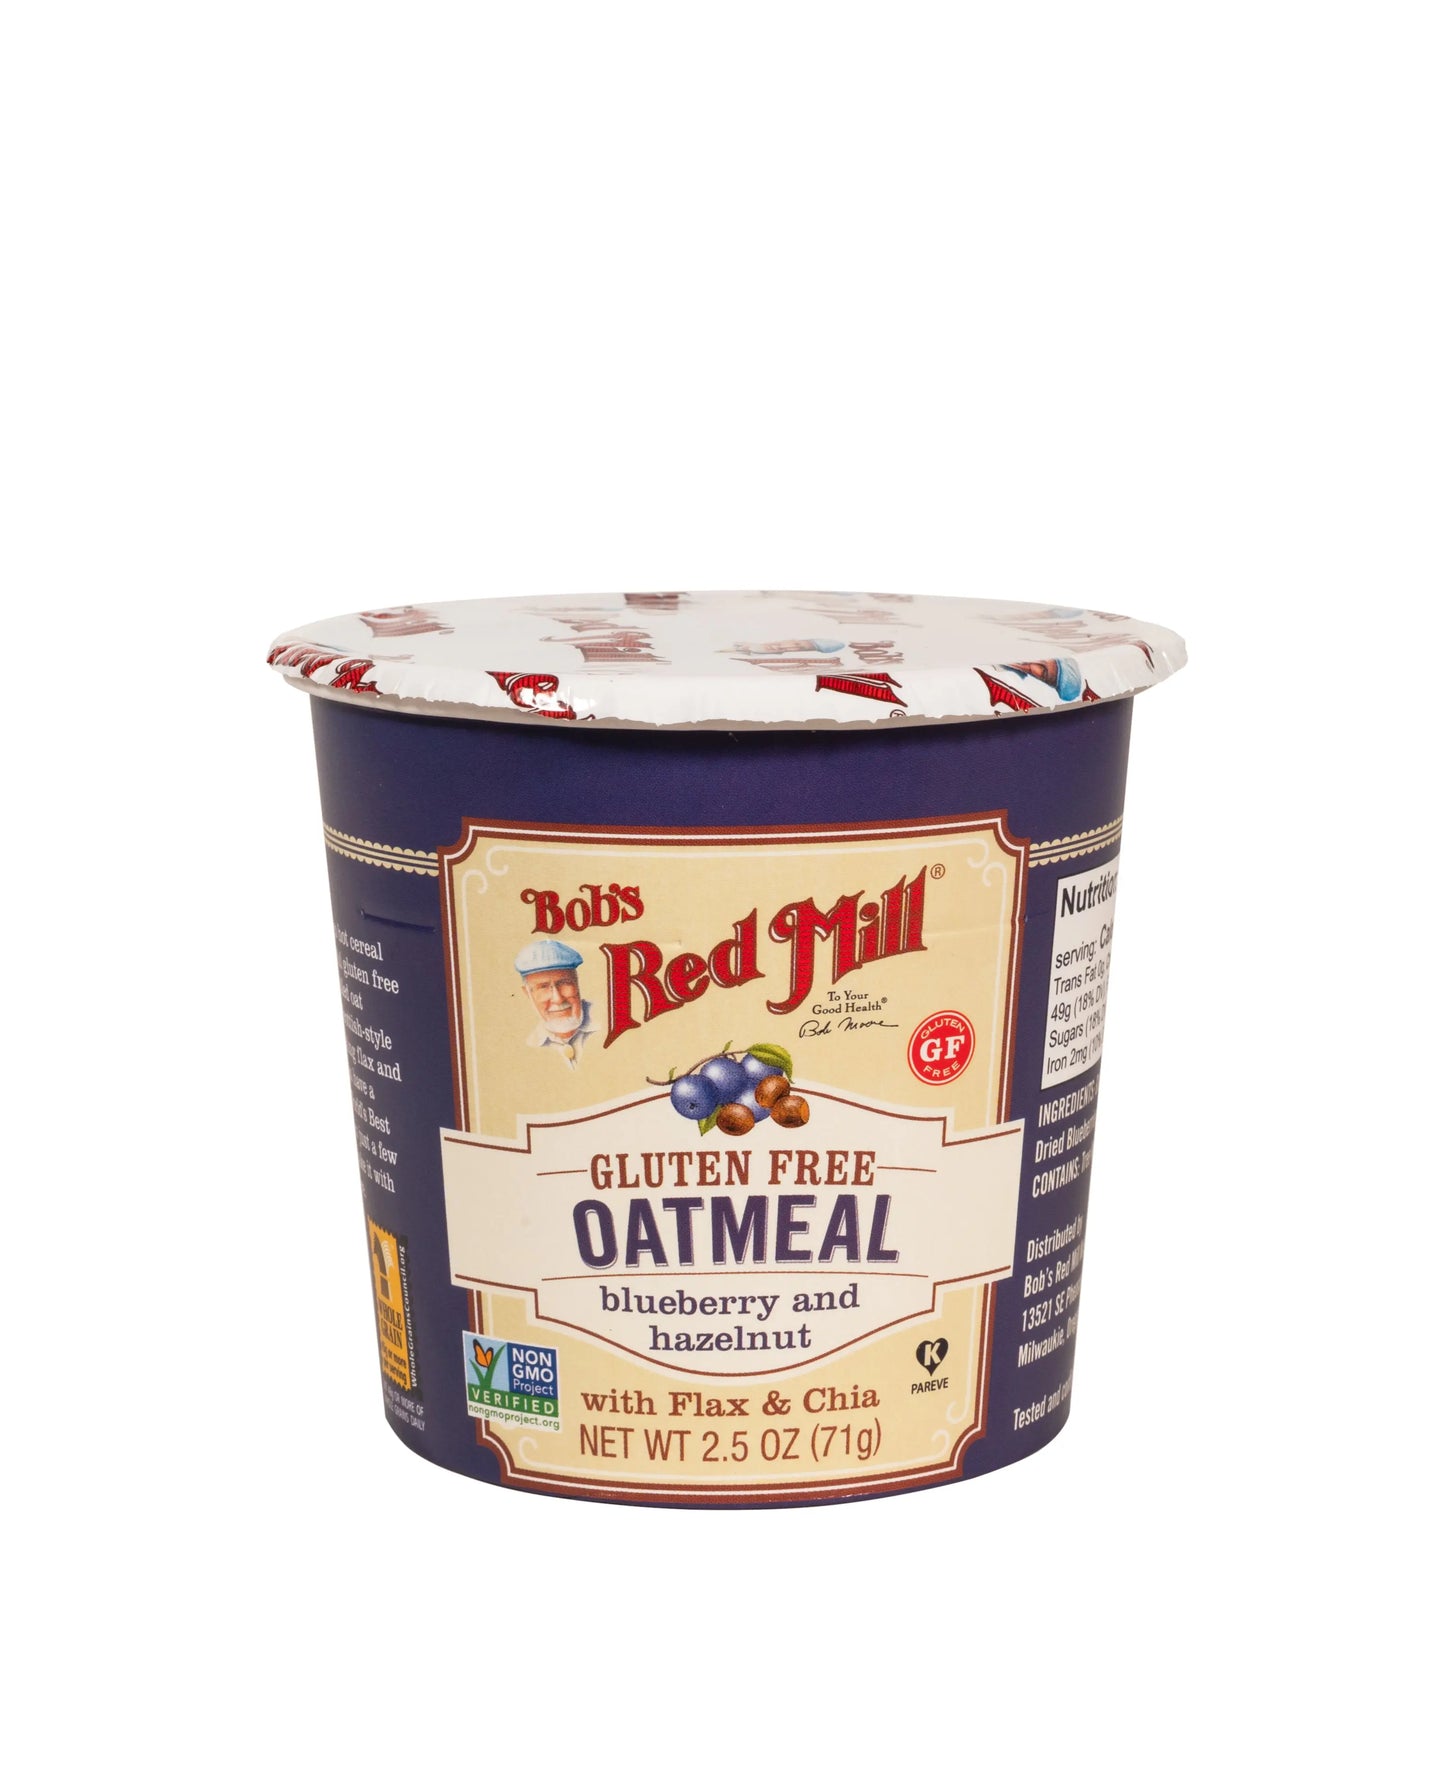 Bob's Red Mill Gluten Free Oatmeal Cup-Blueberry & Hazelnut with Flax & Chia, Non-GMO 71gm Bob's Red Mill